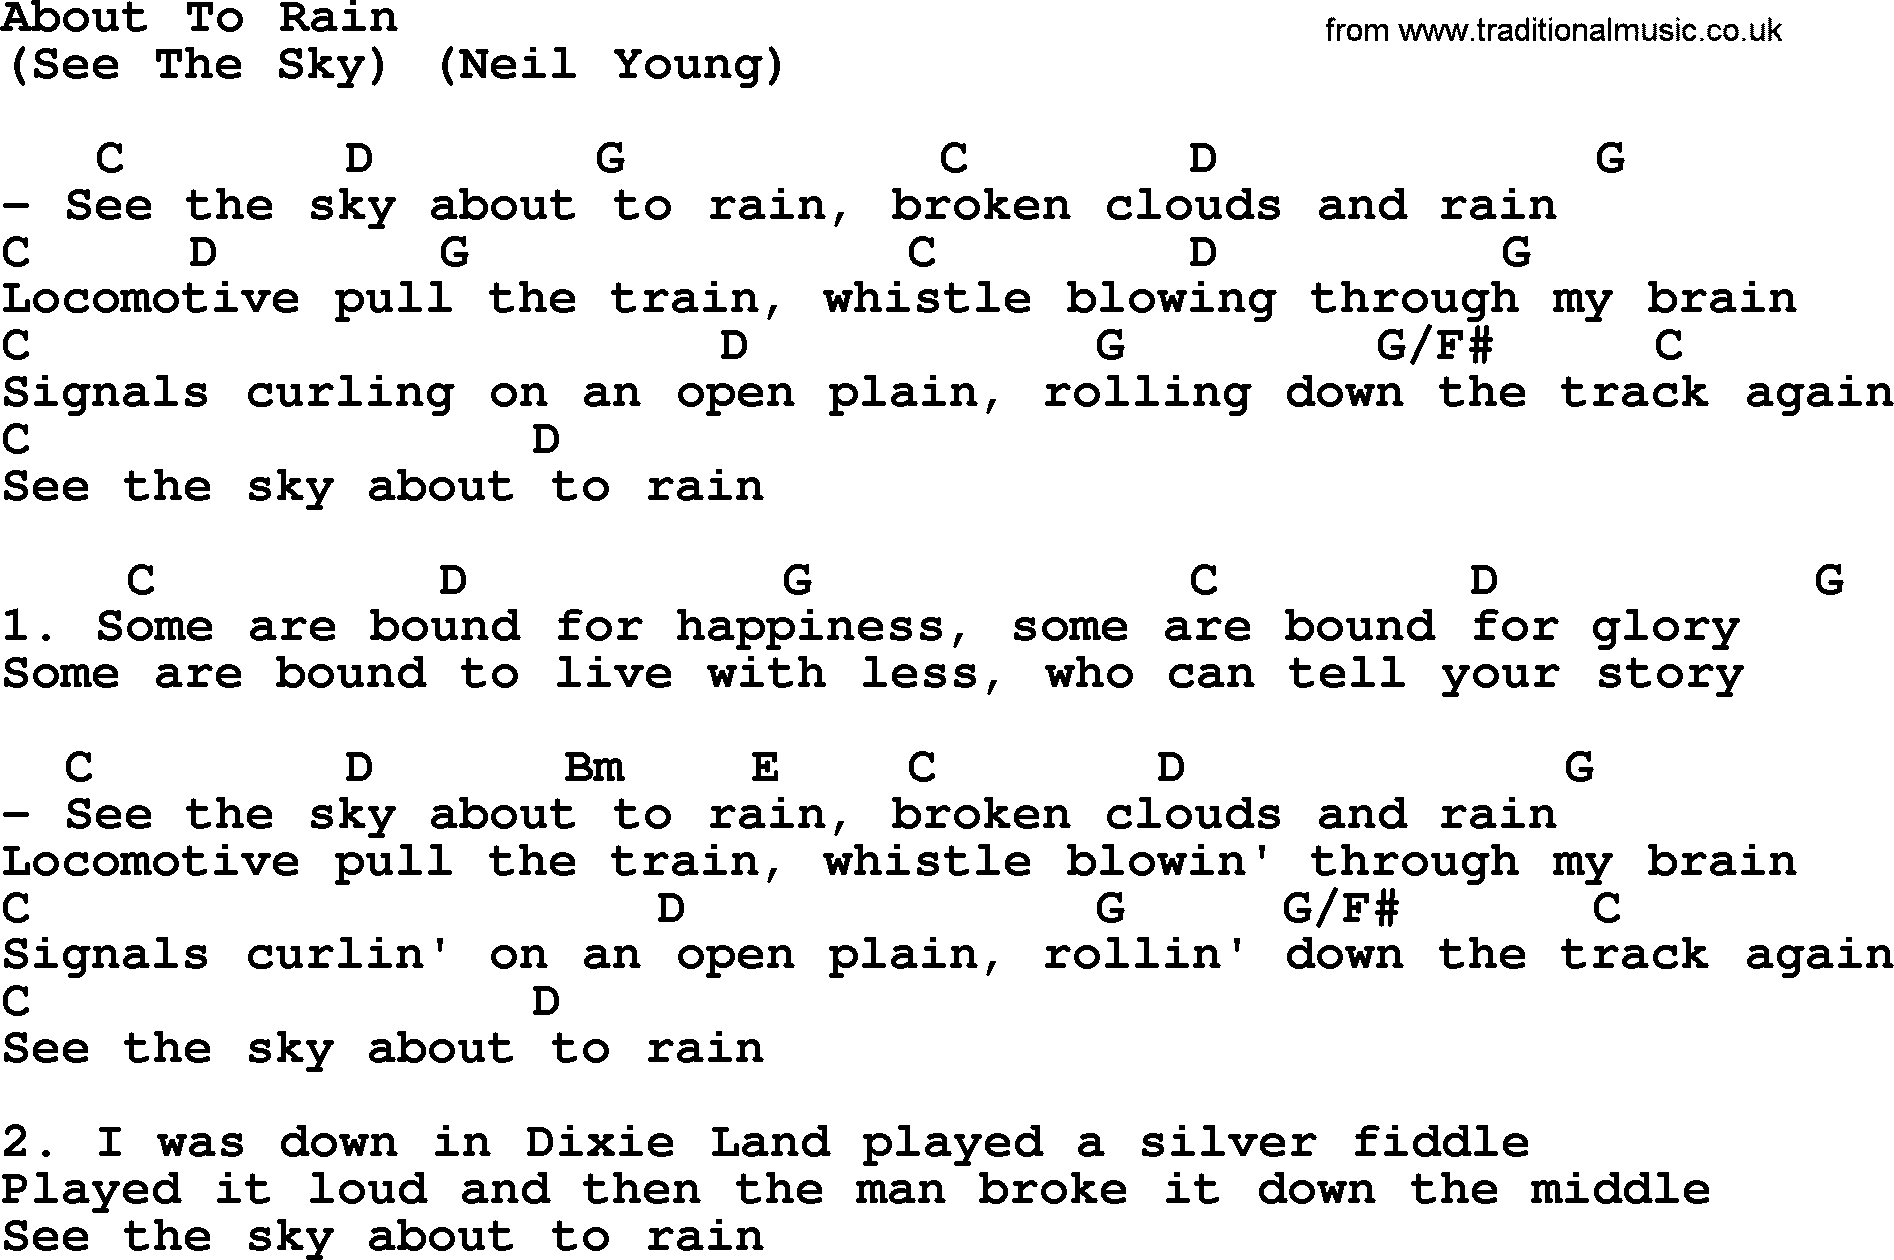 The Byrds song About To Rain, lyrics and chords